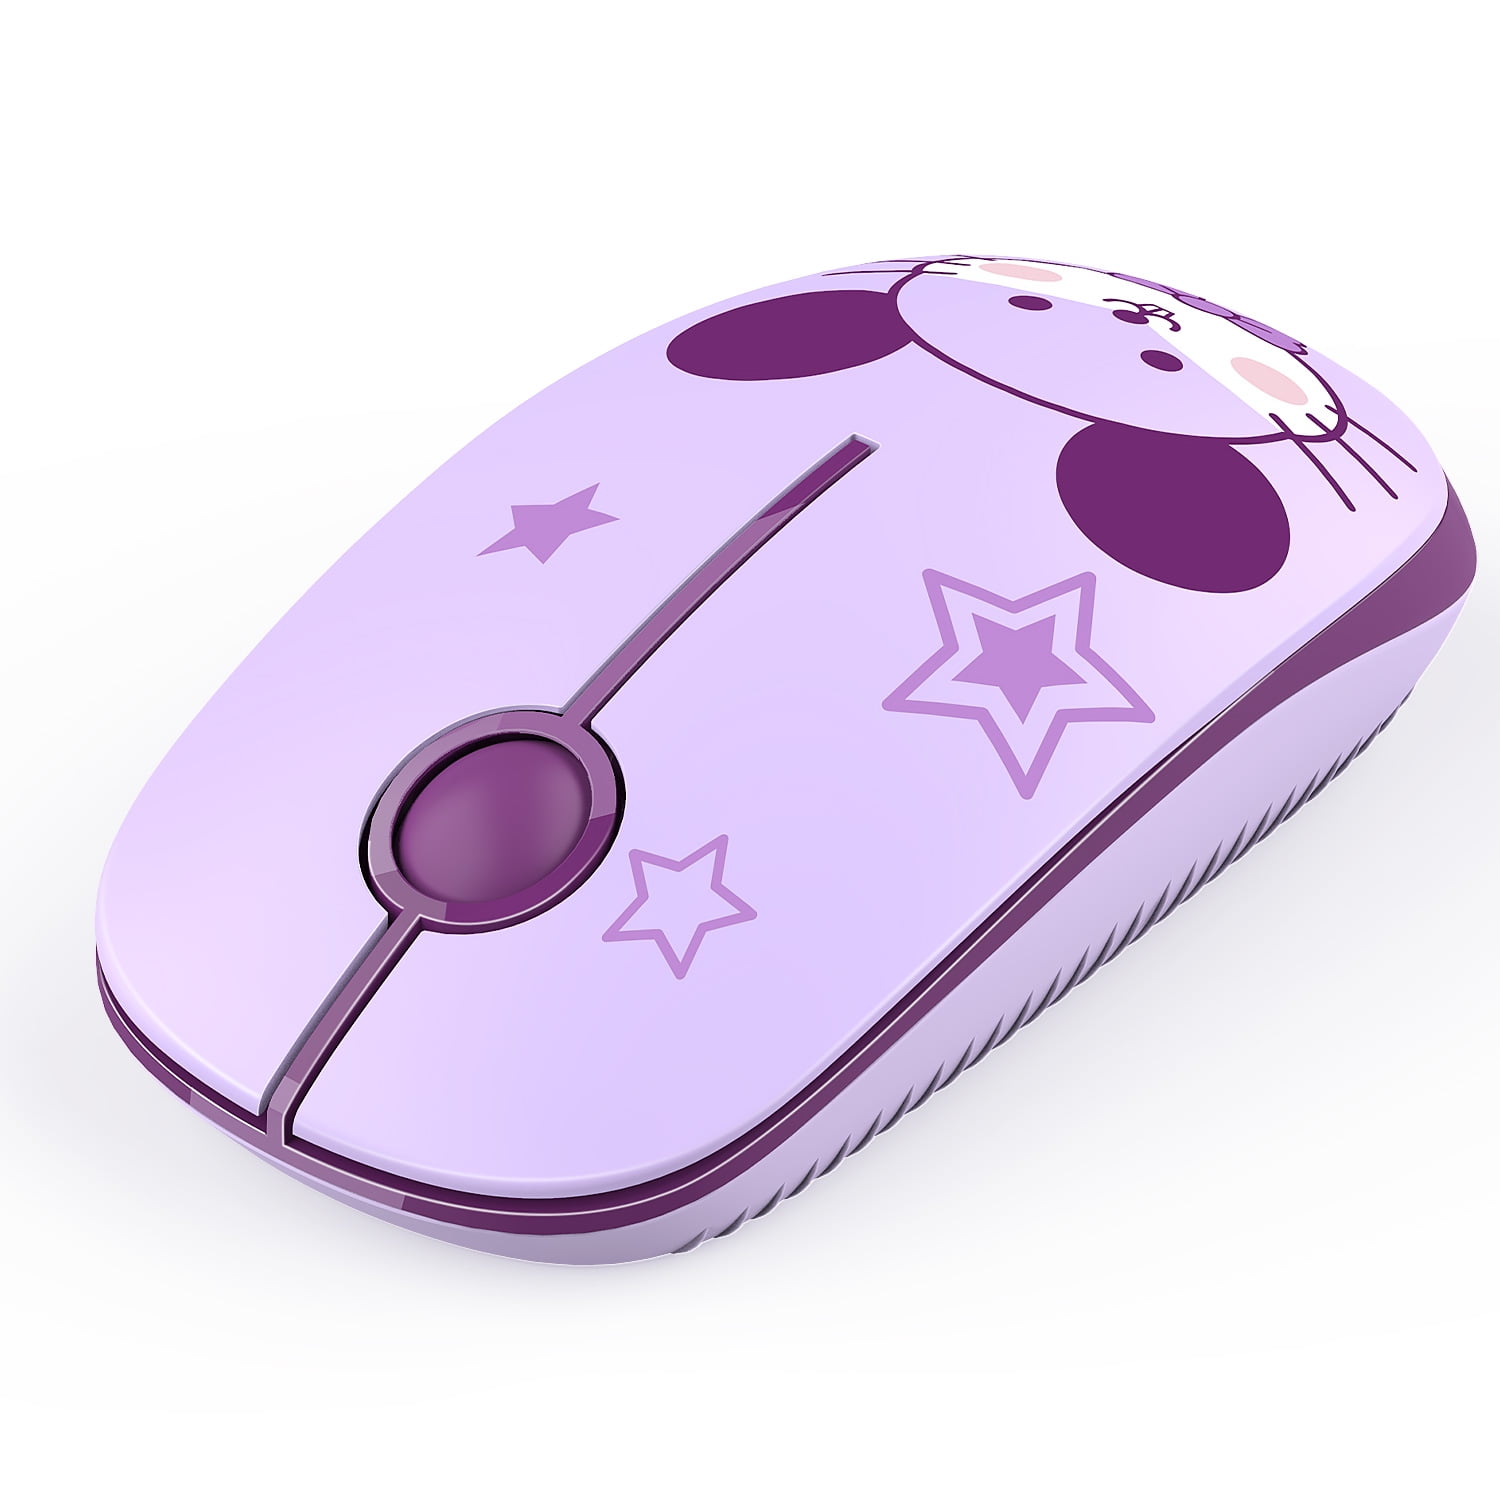 2.4G Wireless Mouse with Cute Pattern Design for All Laptops and Desktops with Nano Receiver New Year 